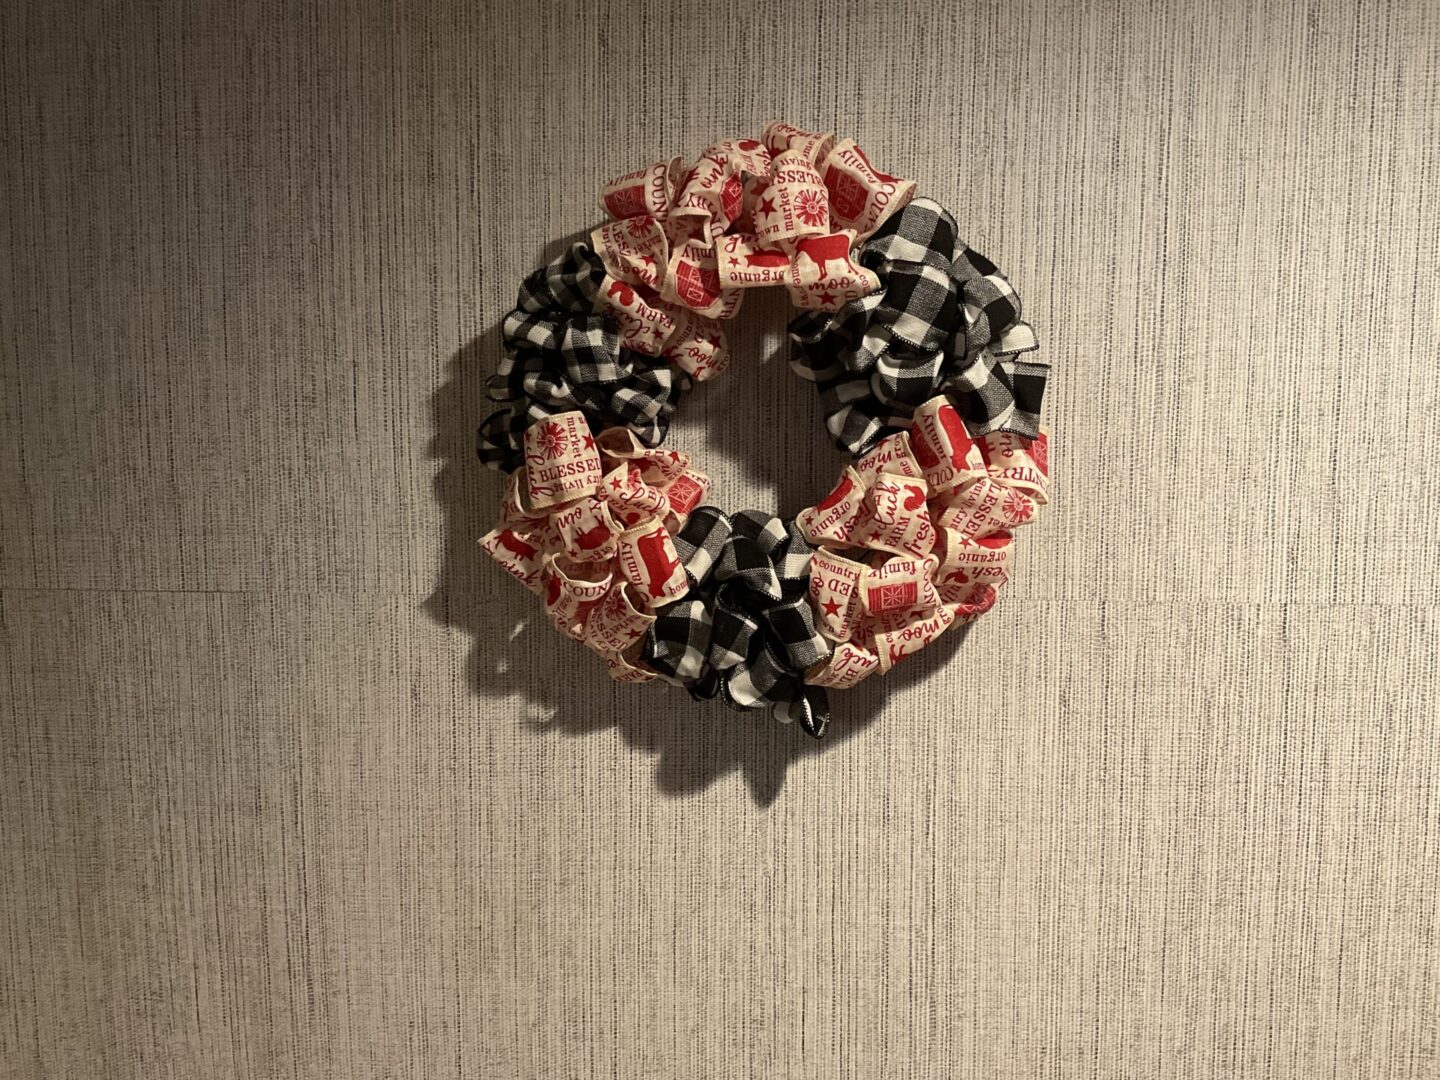 A wreath made of candy sitting on the wall.